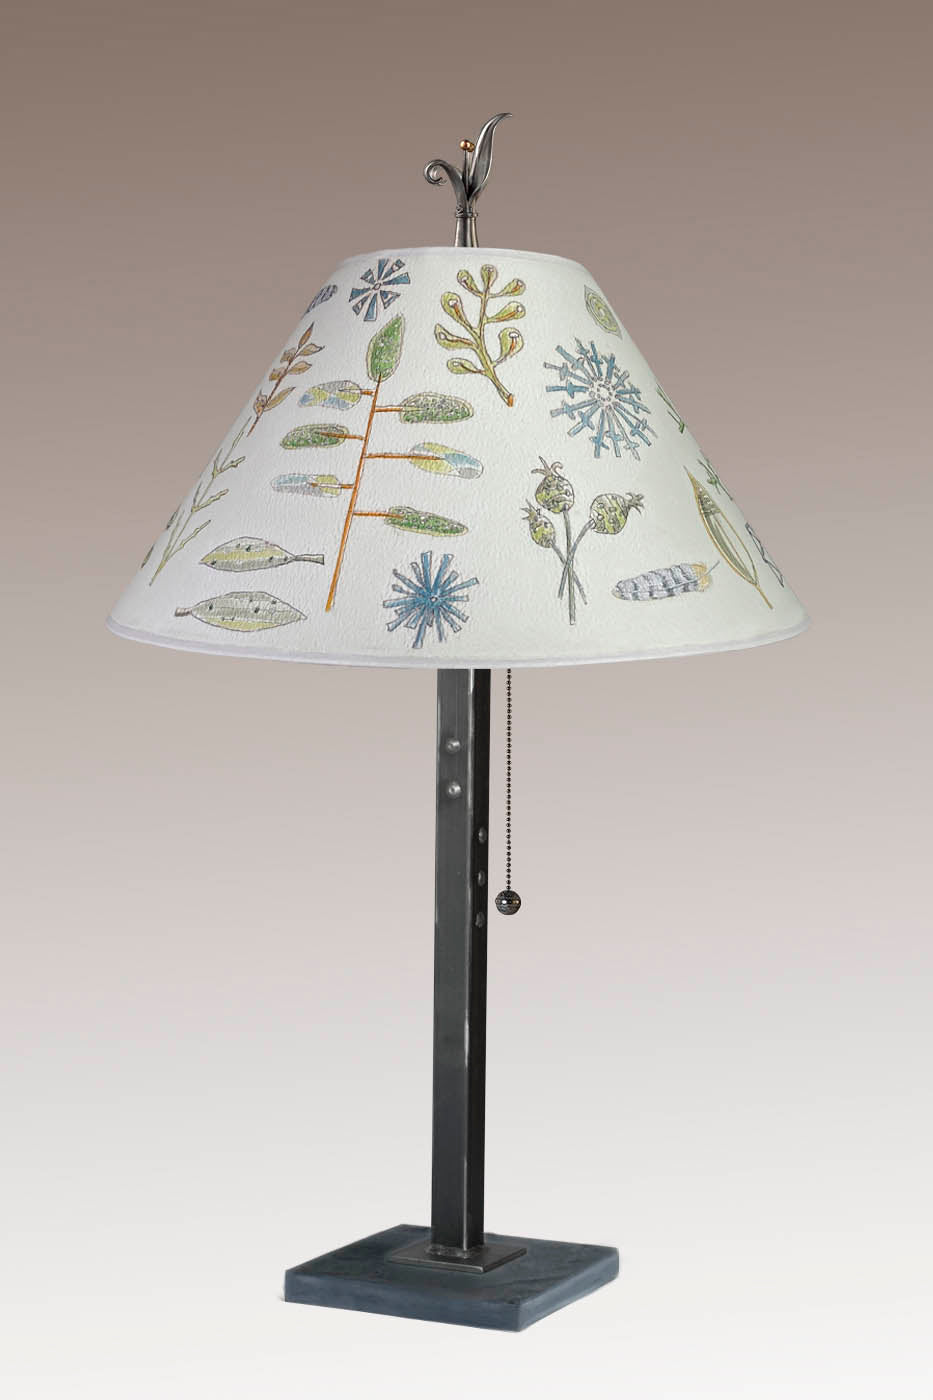 Janna Ugone &amp; Co Table Lamp Steel Table Lamp on Wood with Large Conical Shade in Field Chart